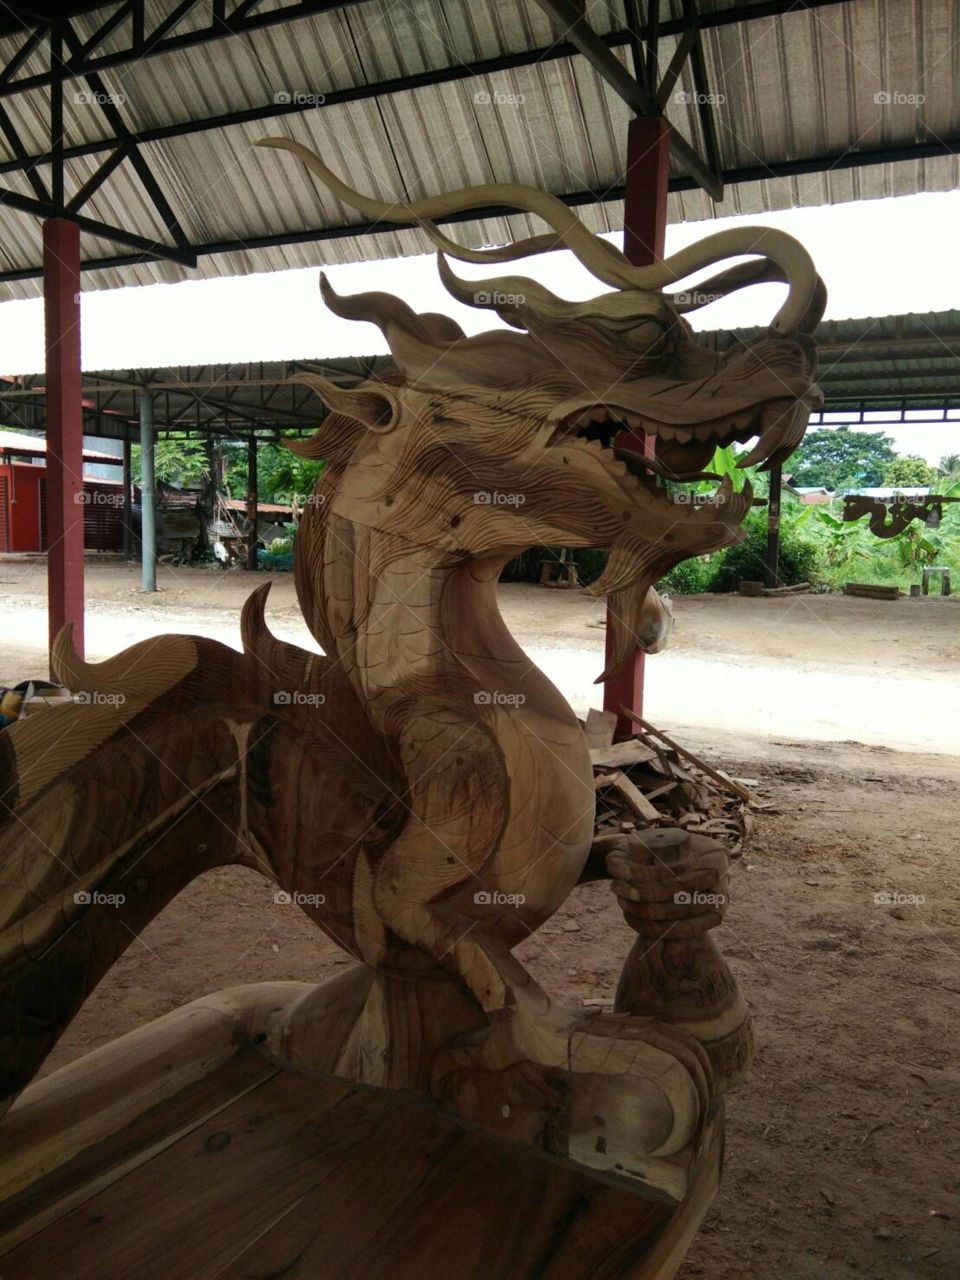 The dragon of wood